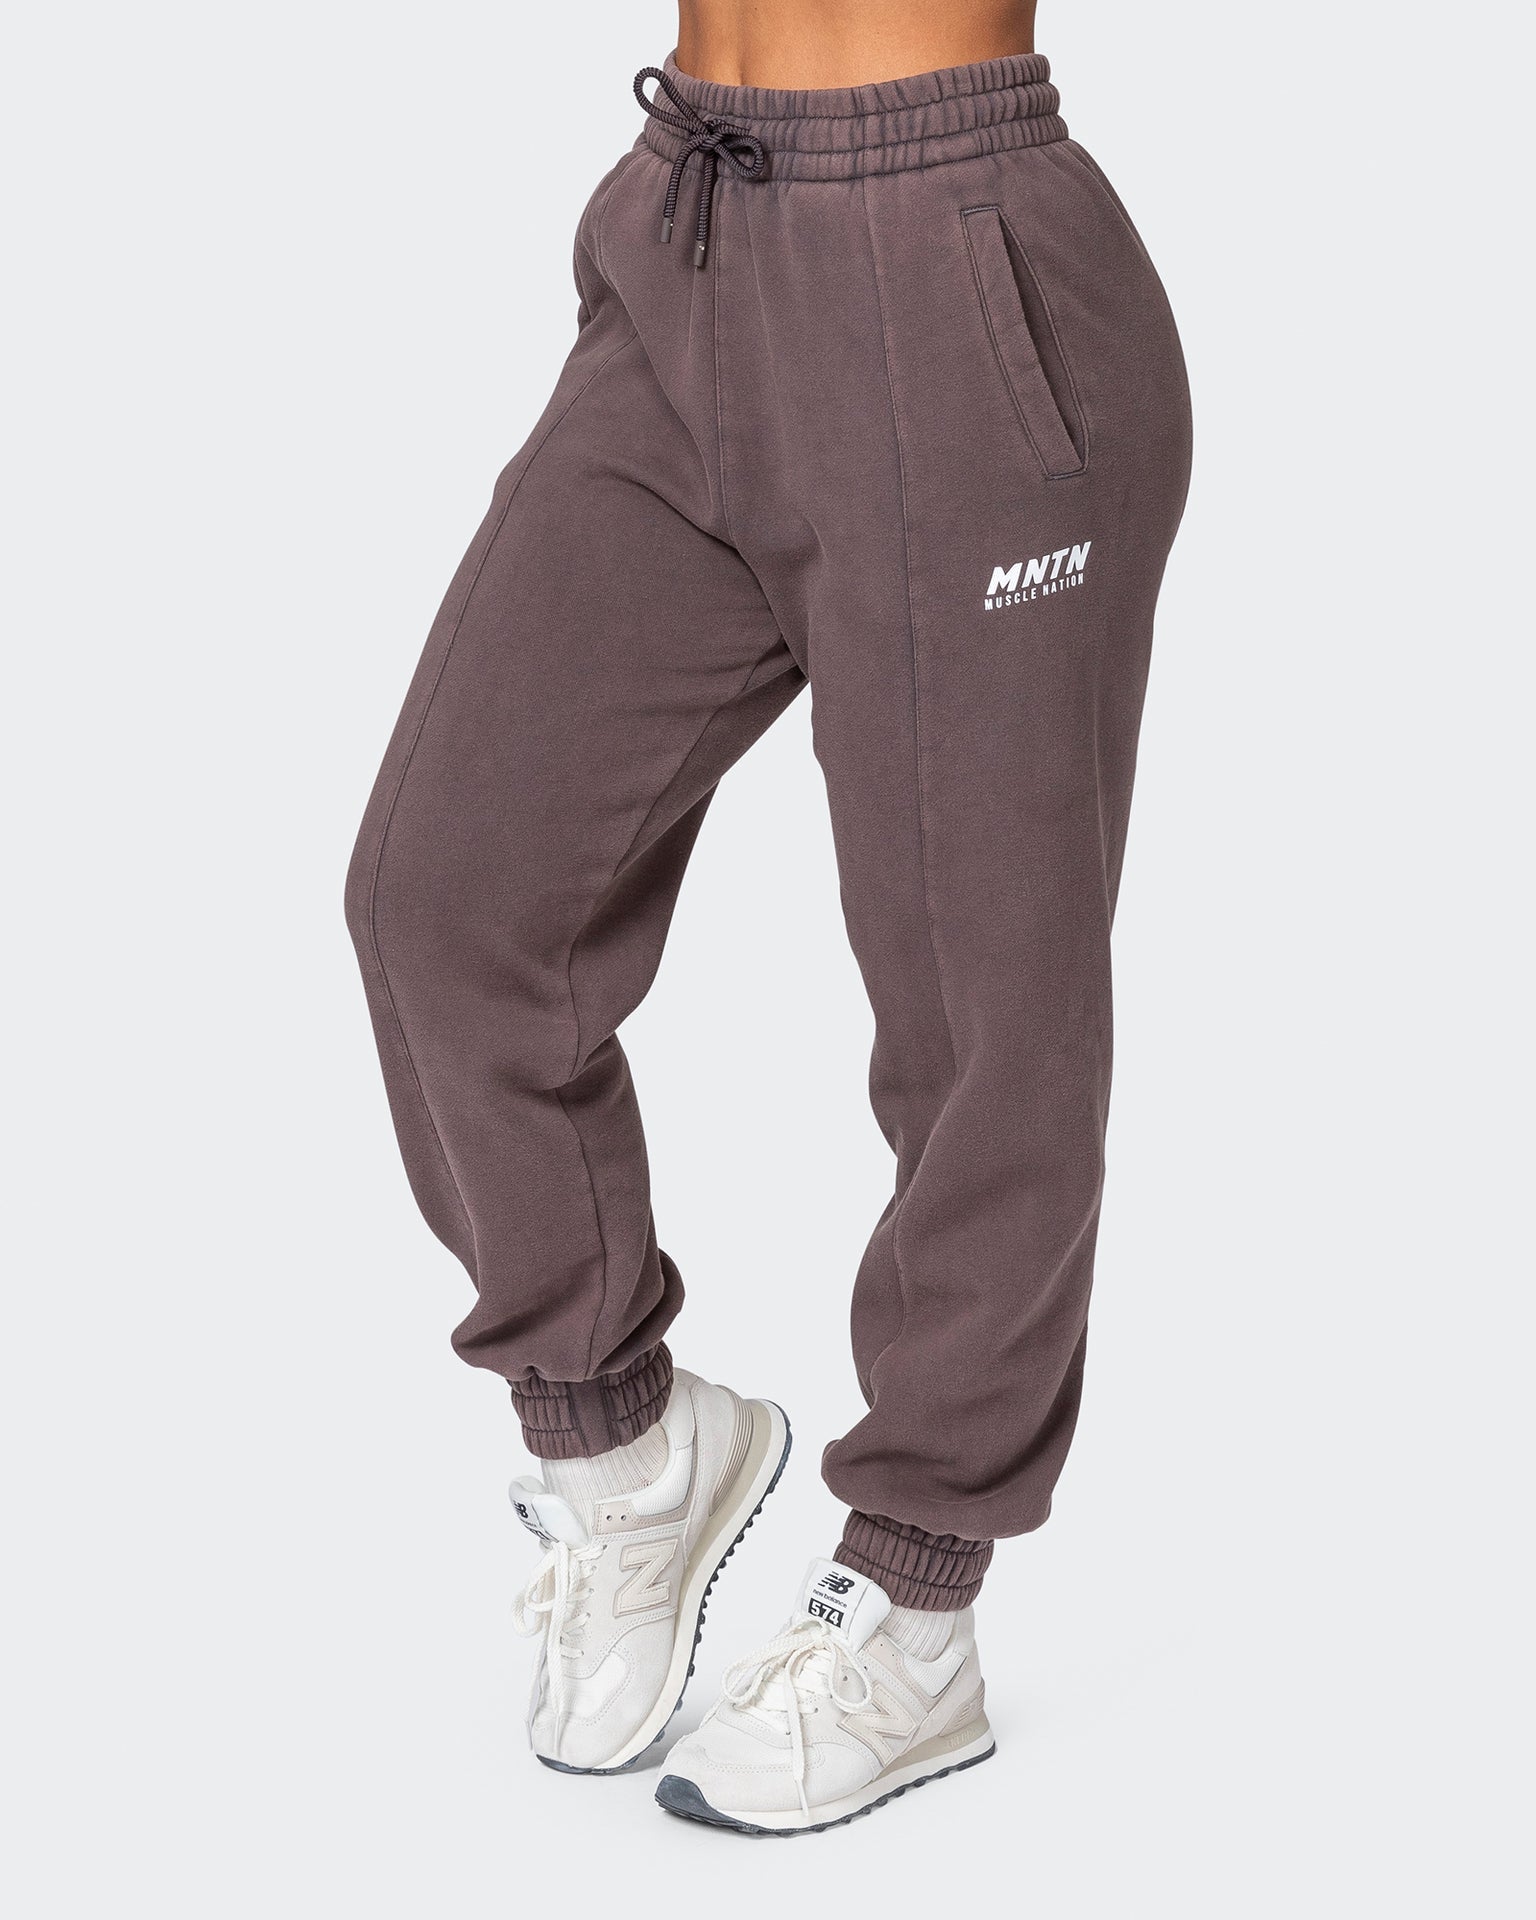 Muscle Nation Track Pants Vintage Lounge Trackpants - Washed Peppercorn